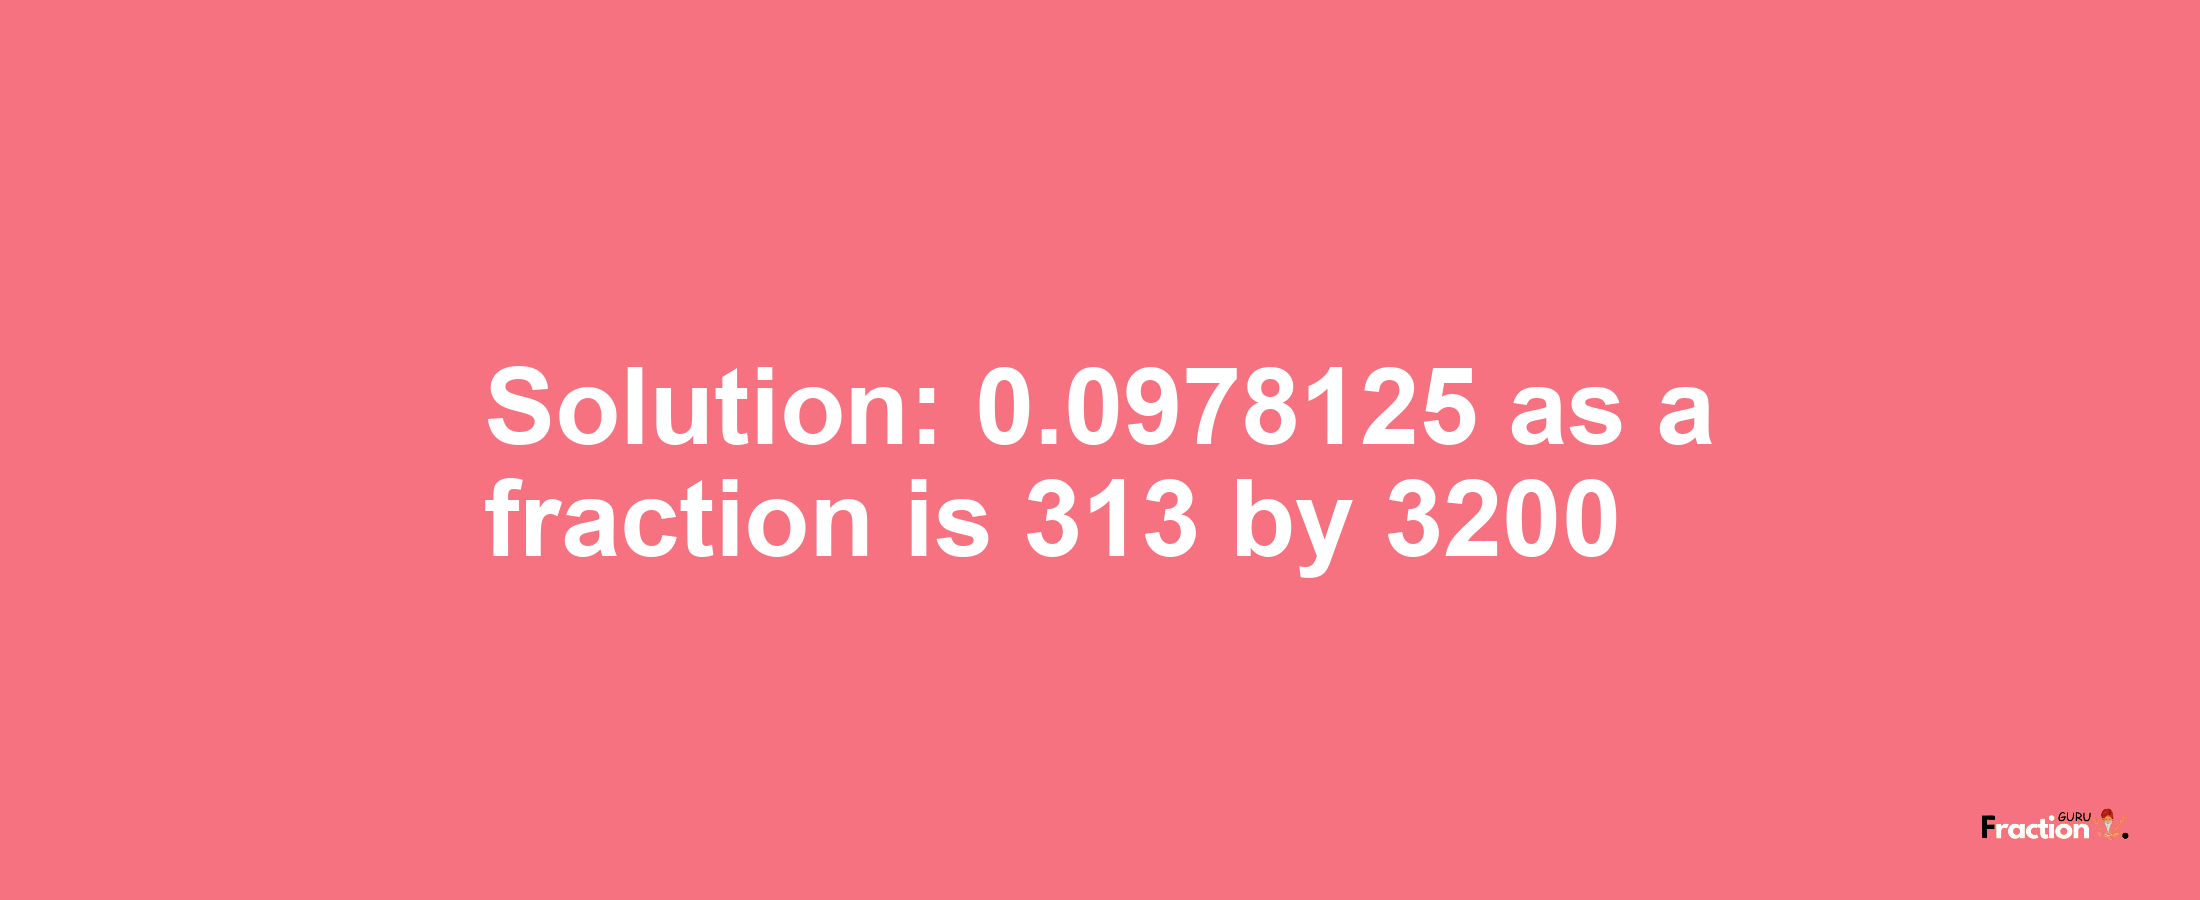 Solution:0.0978125 as a fraction is 313/3200